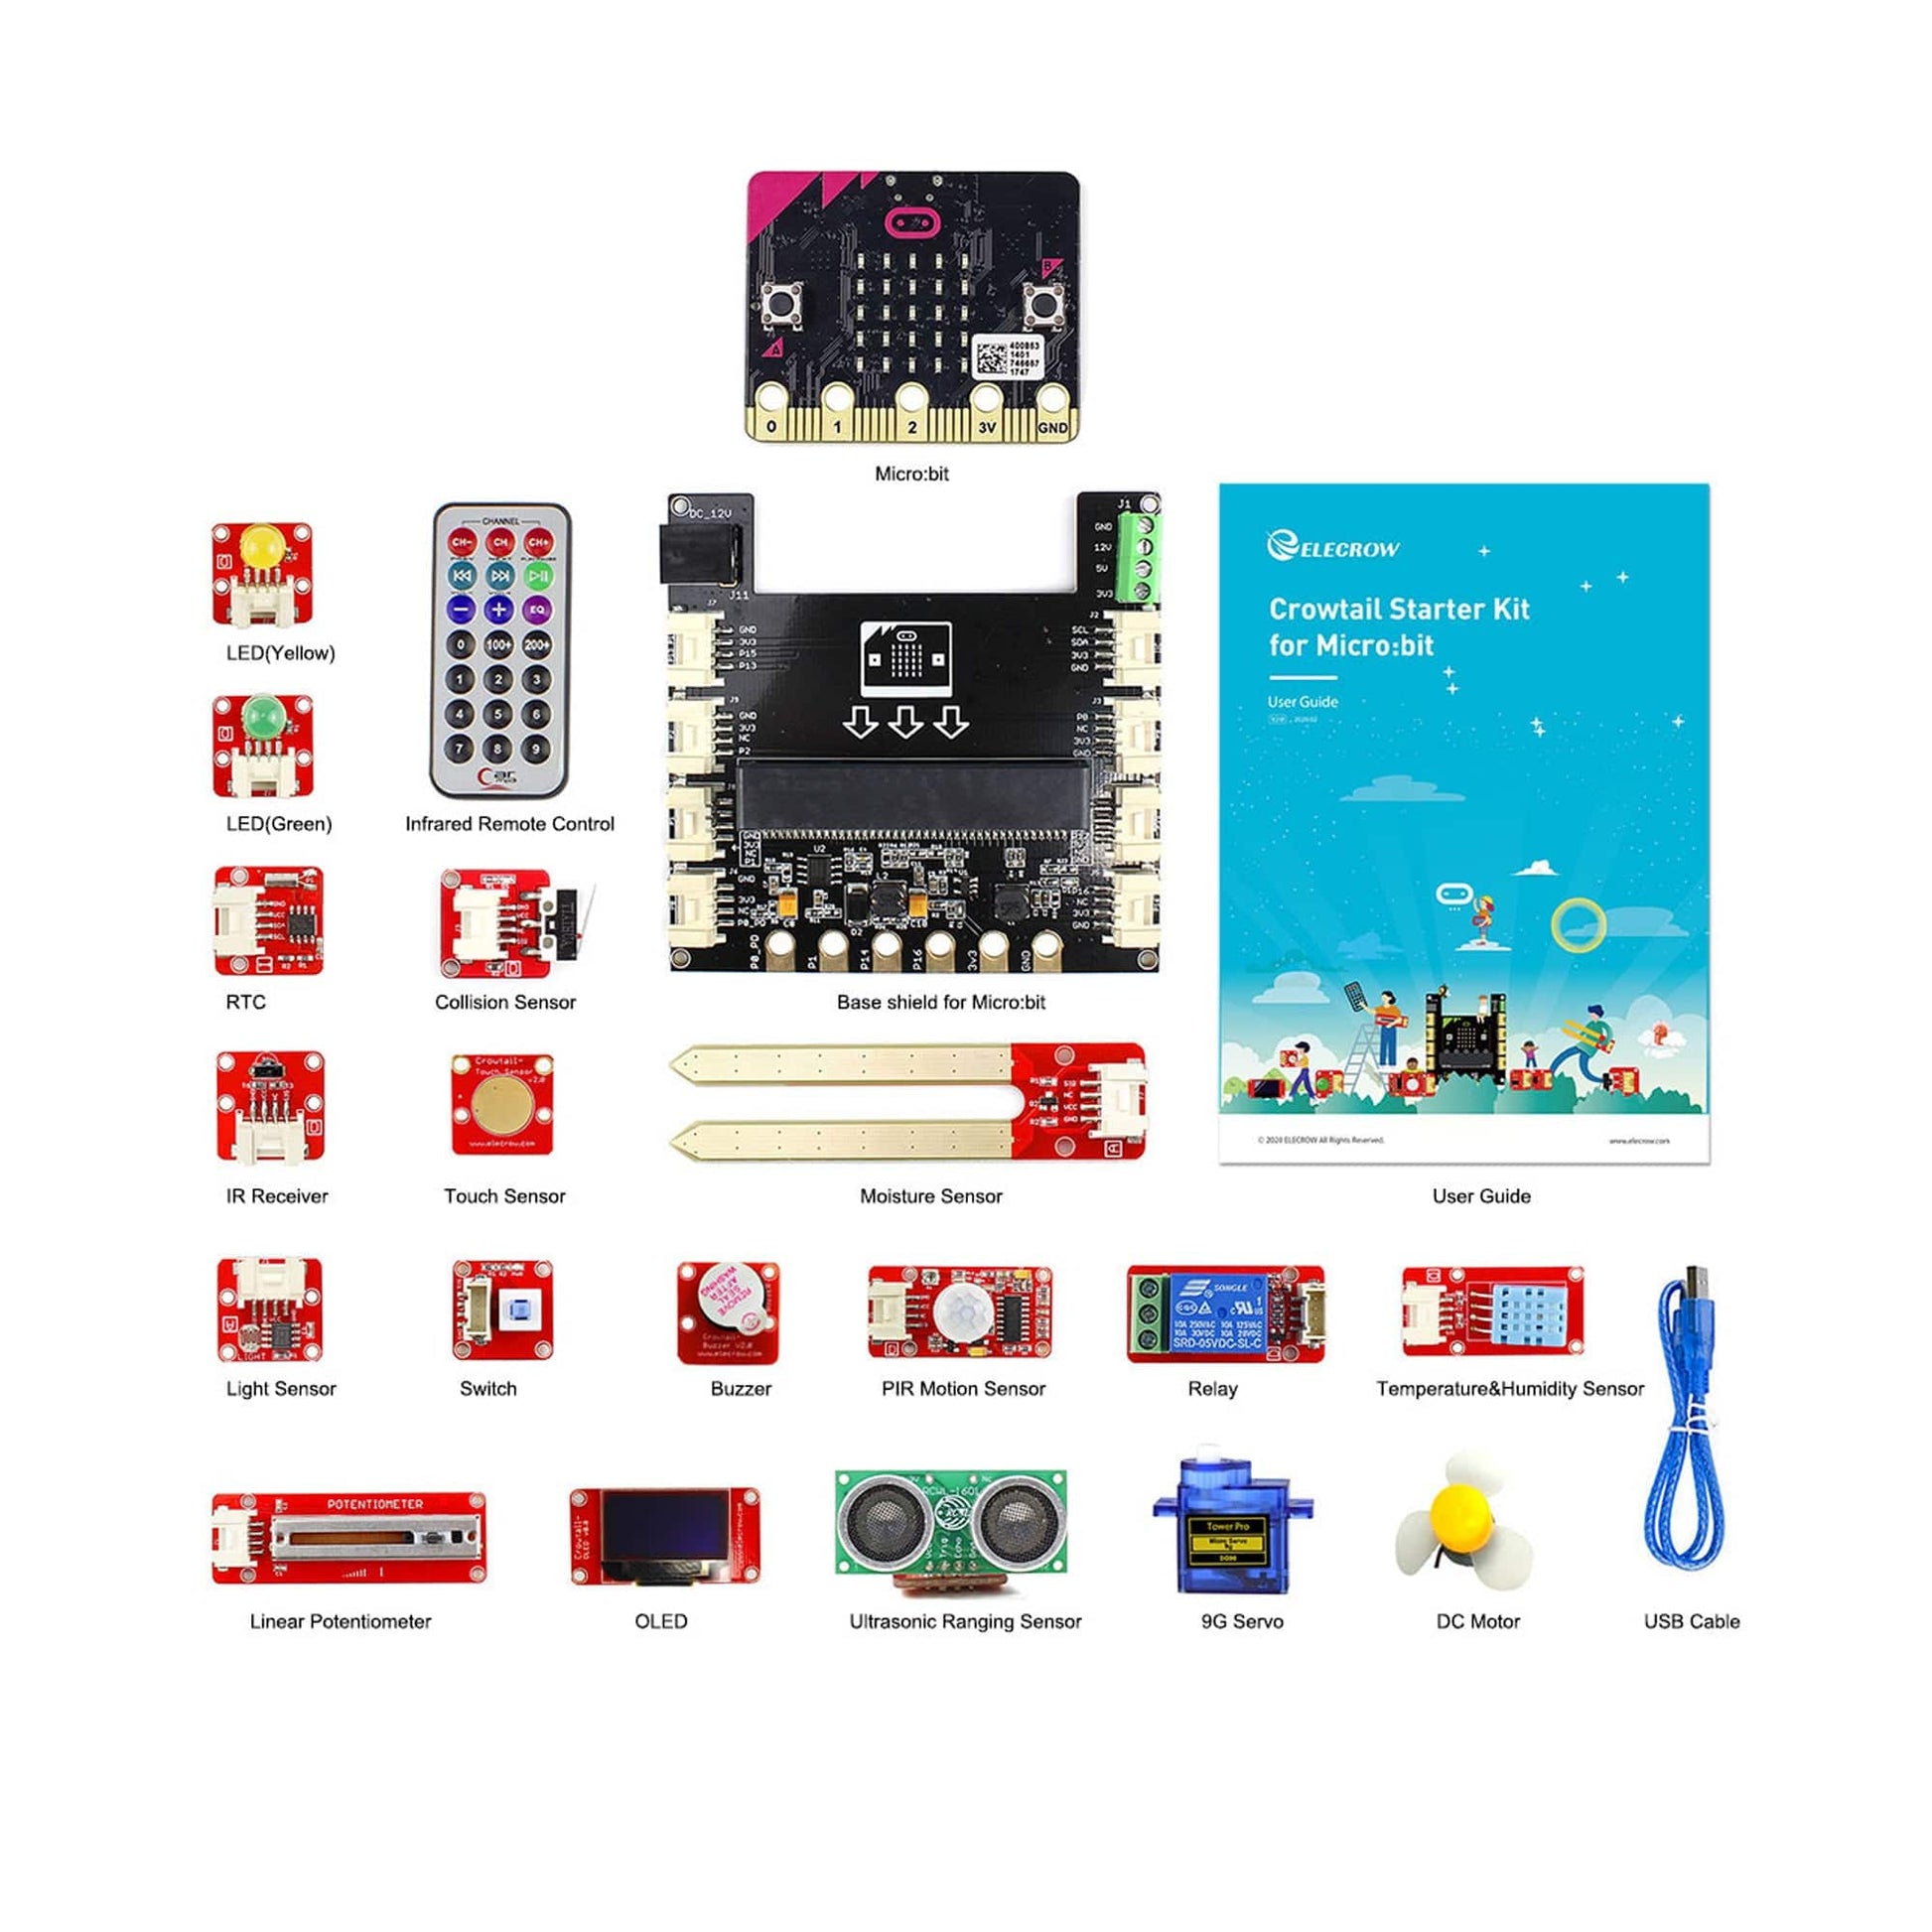 Crowtail-Starter Kit for Micro:bit with Tutorial